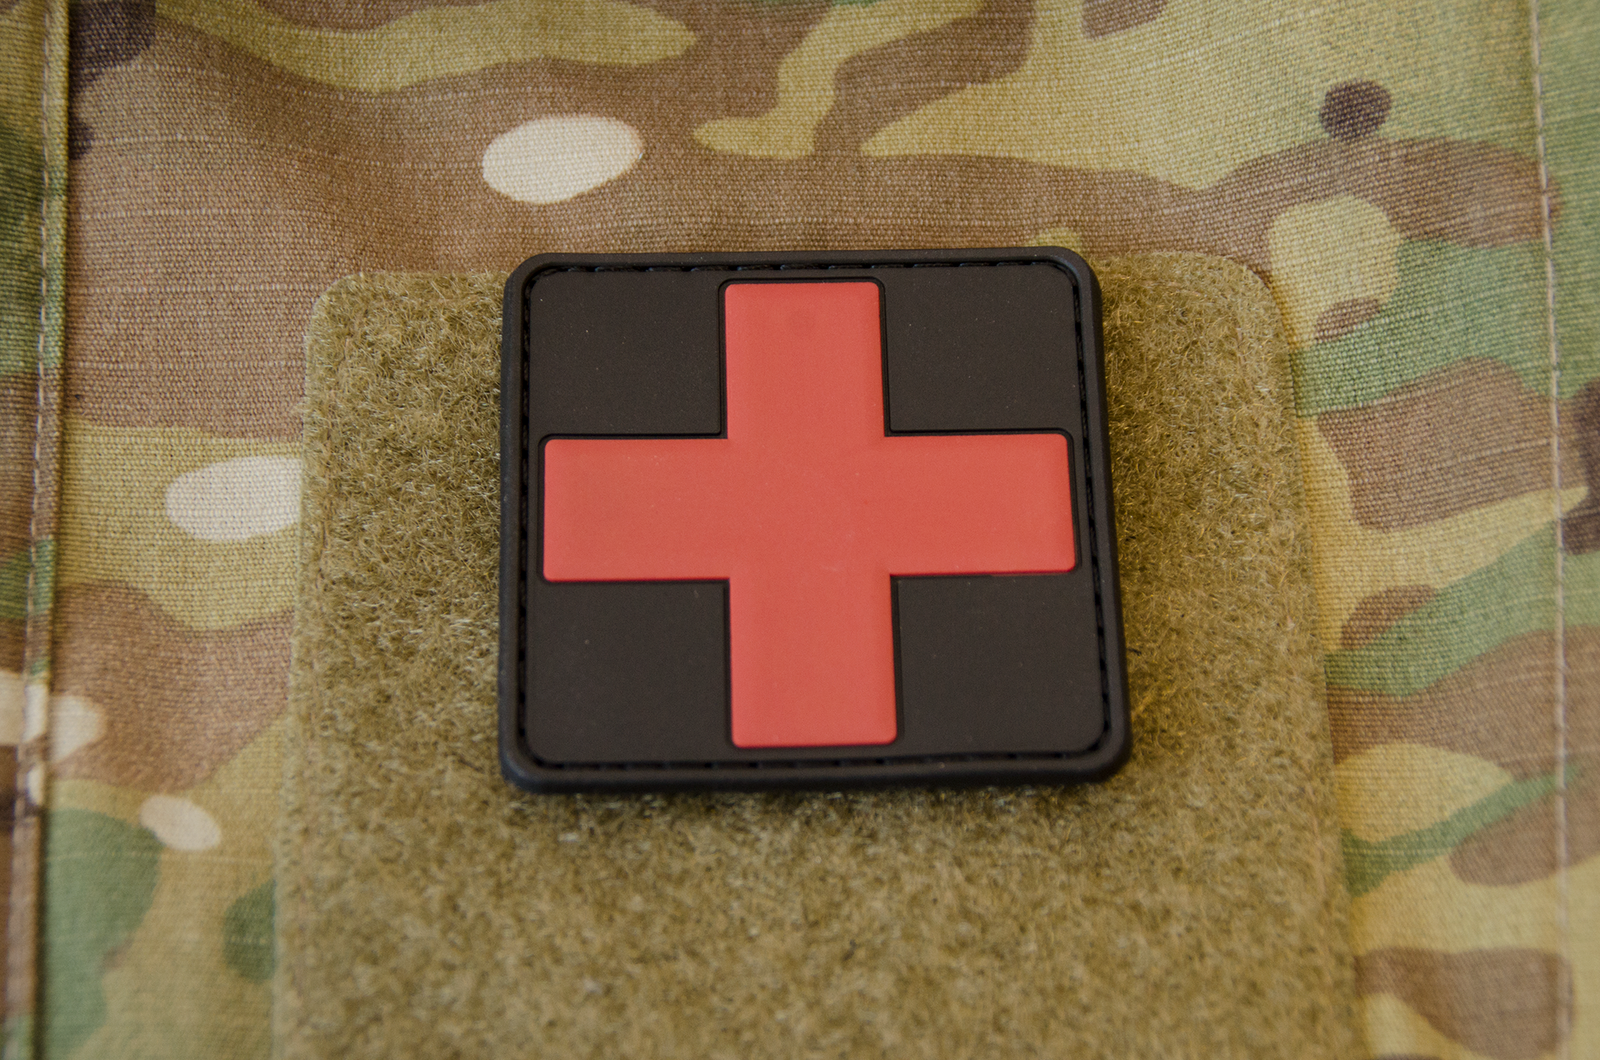 Medic Kinda Patch (5 Inch) Velcro Hook and Loop Badge First Aid Medica –  karmapatch.com